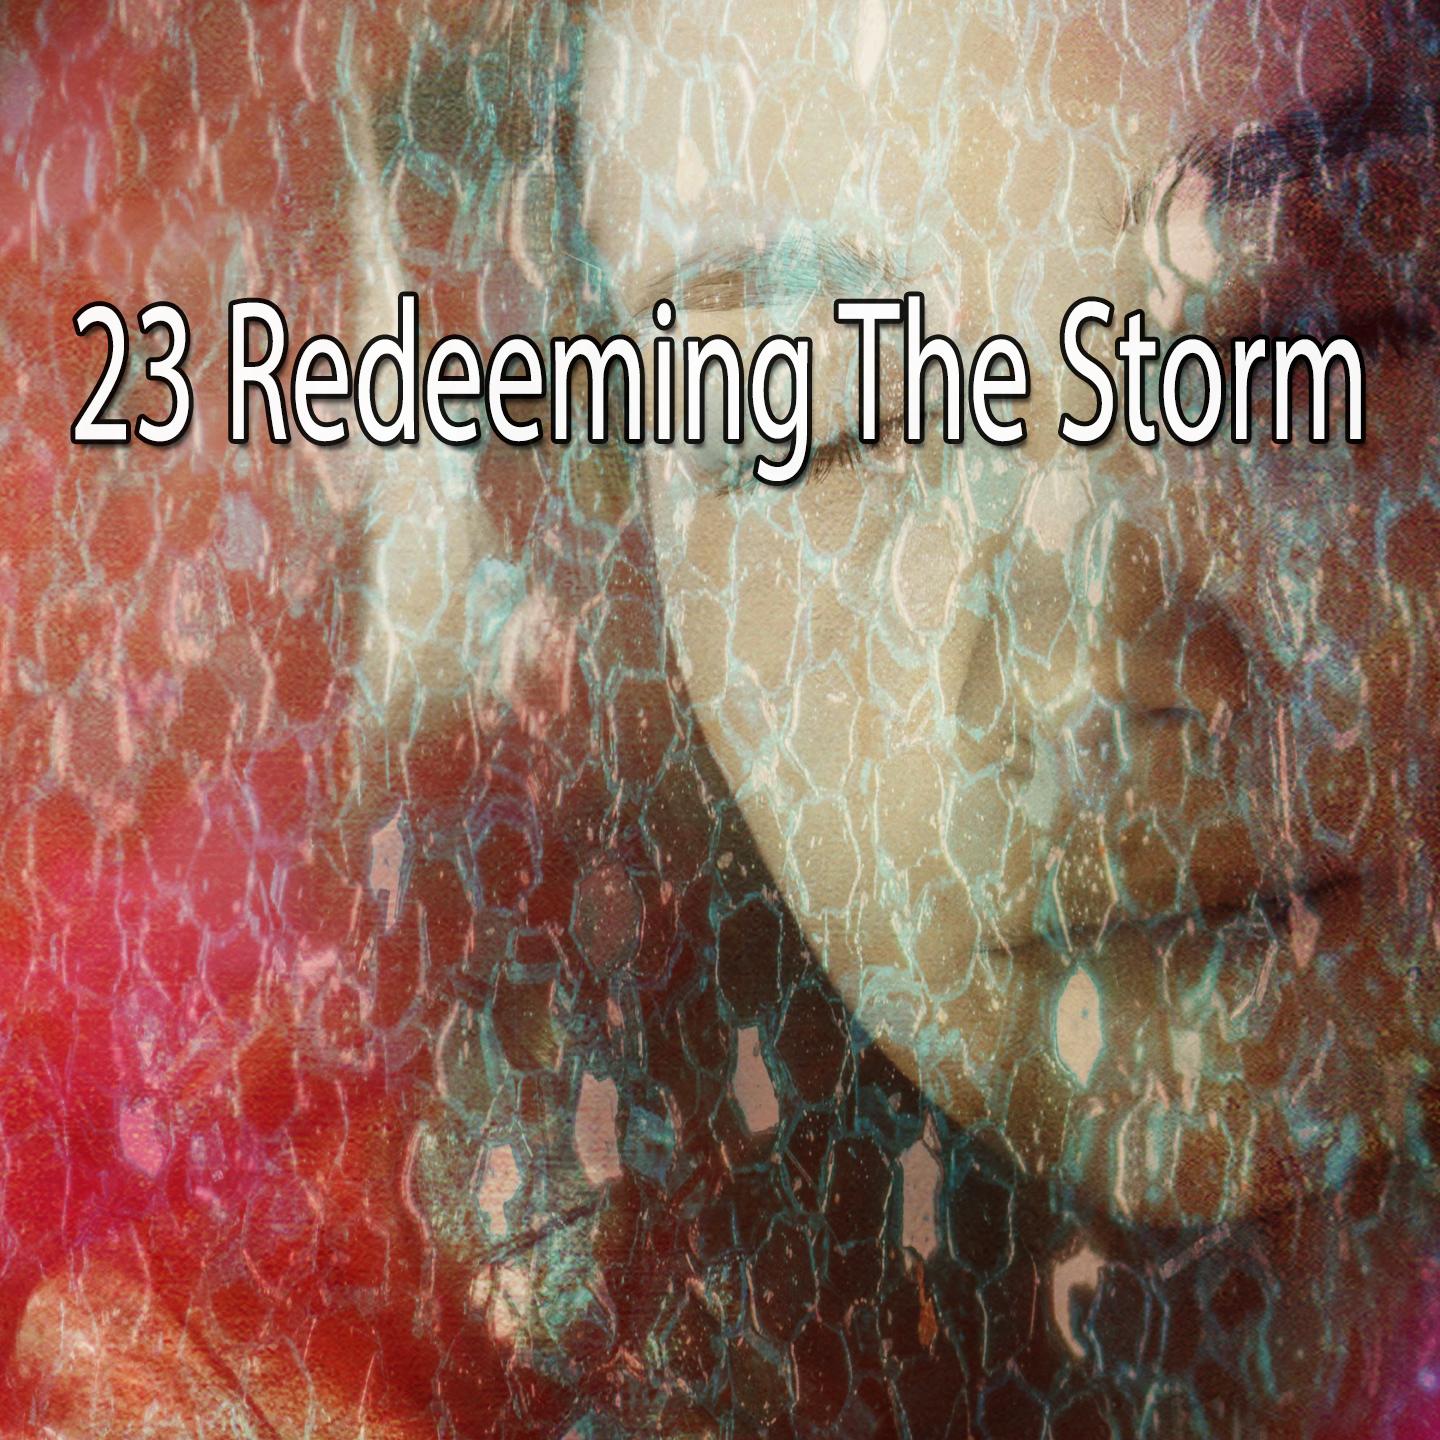 23 Redeeming the Storm